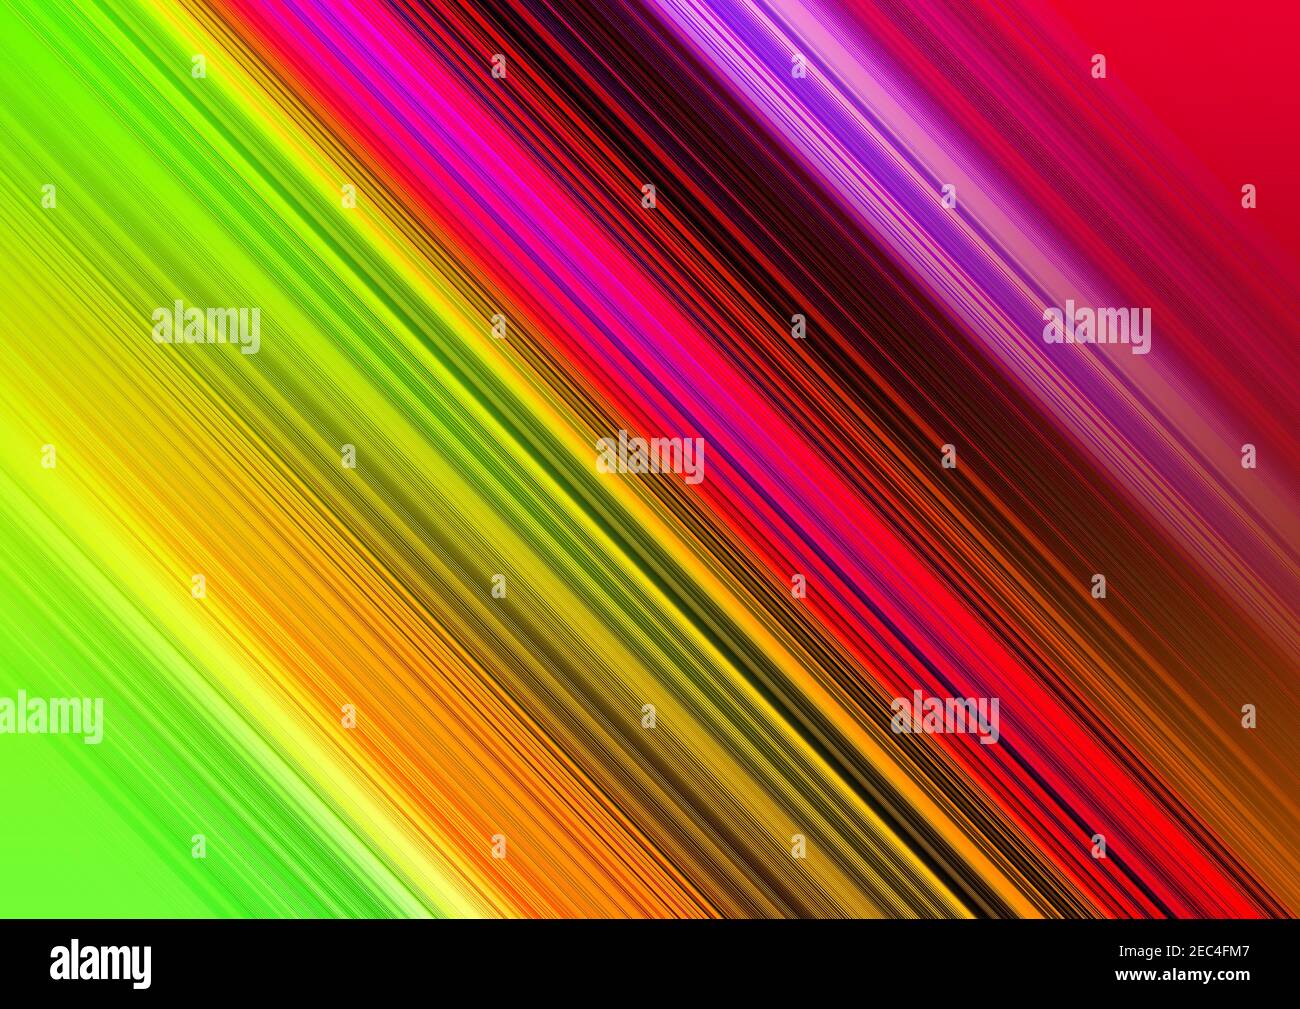 purple blue pink yellow white motion blur abstract background Stock Photo